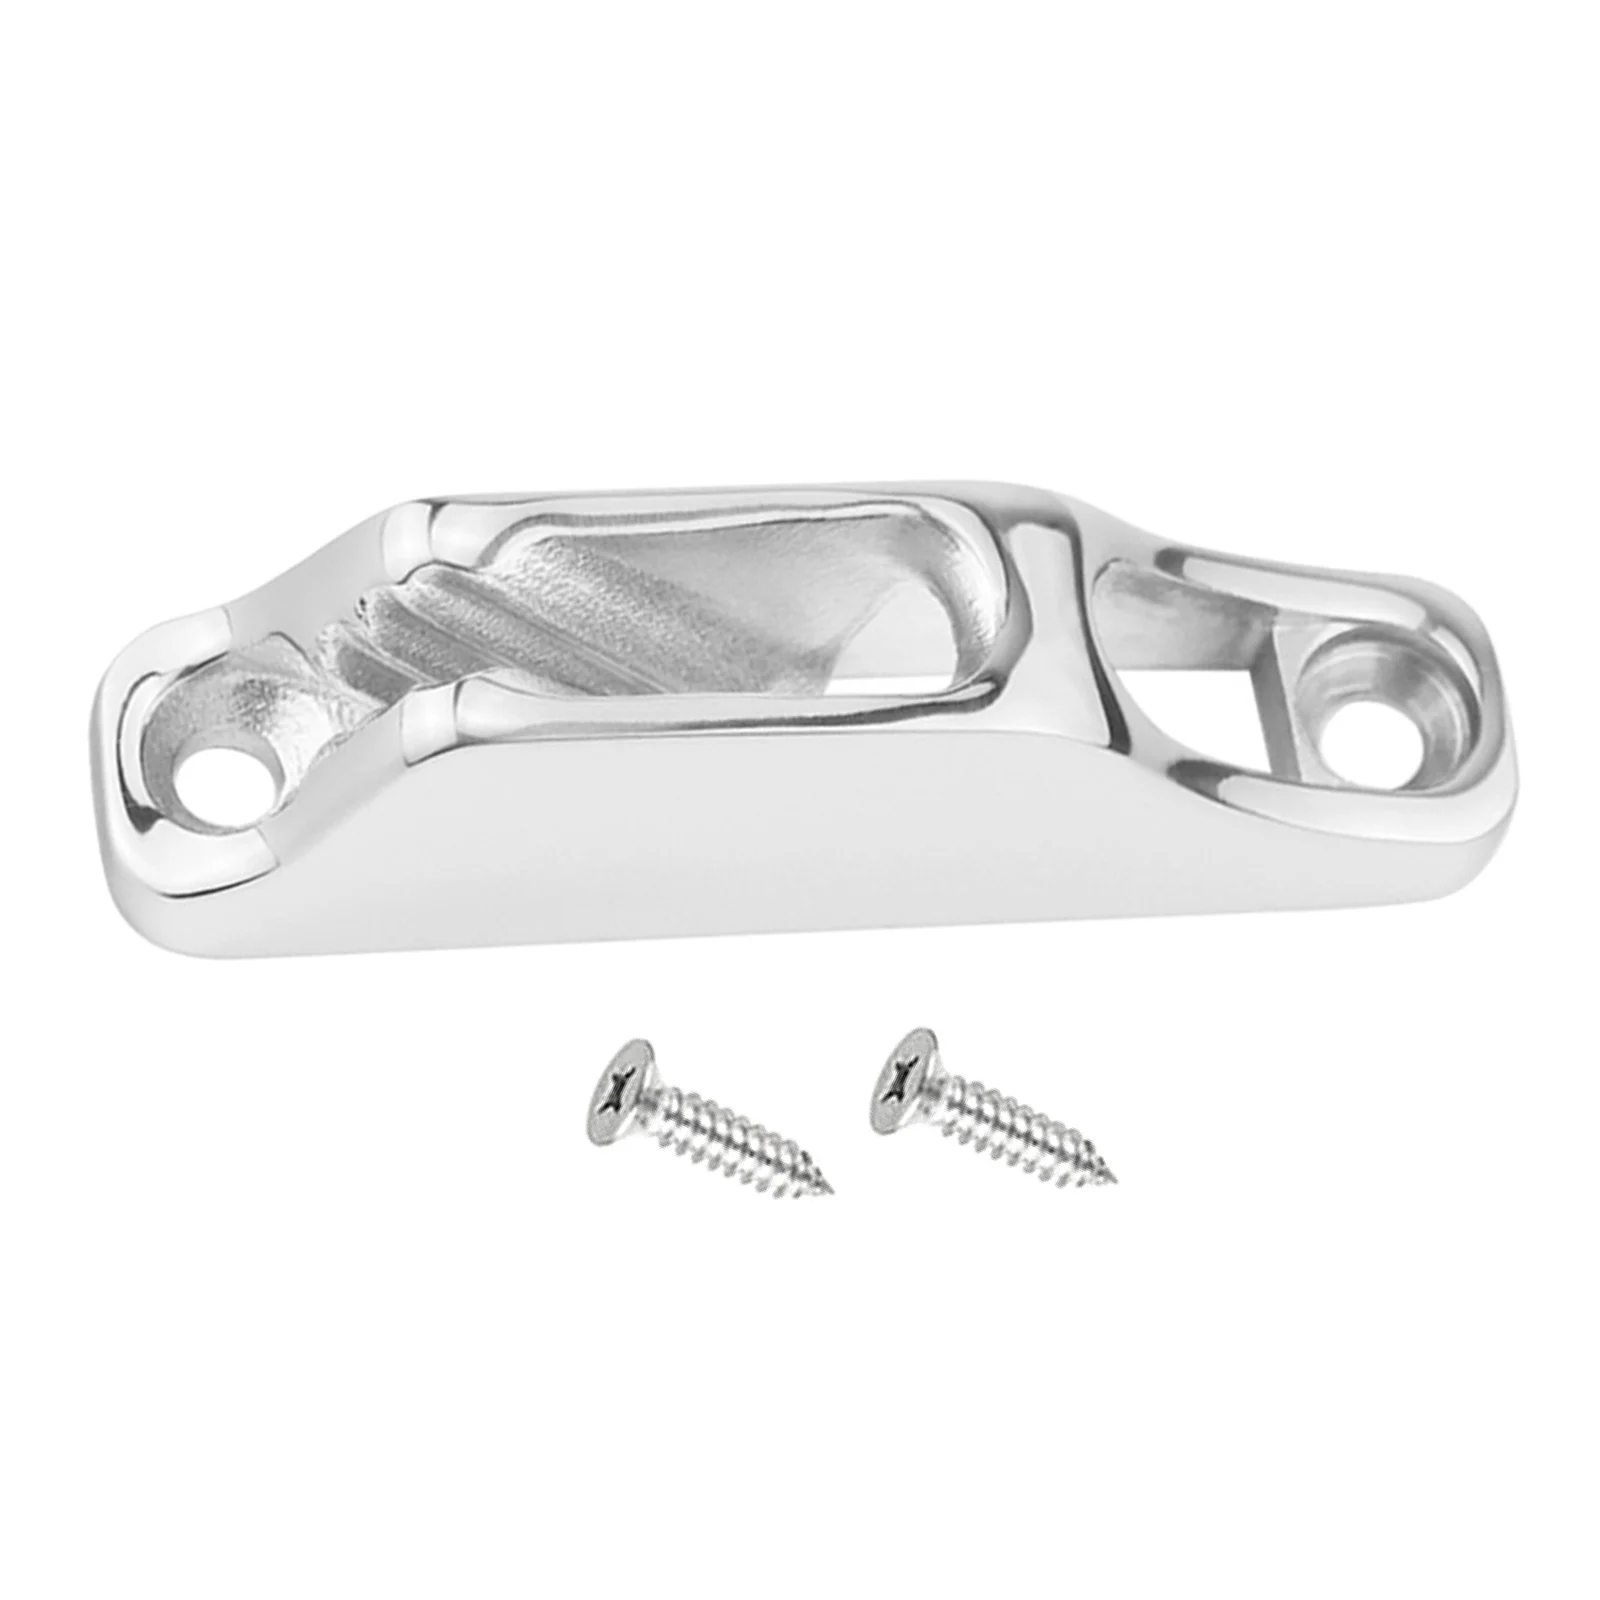 Durable 316 Stainless Steel Boat Clam Cleat Rope Cleat Jam Cleat line cleat Boat Parts Hardware marine Accessories